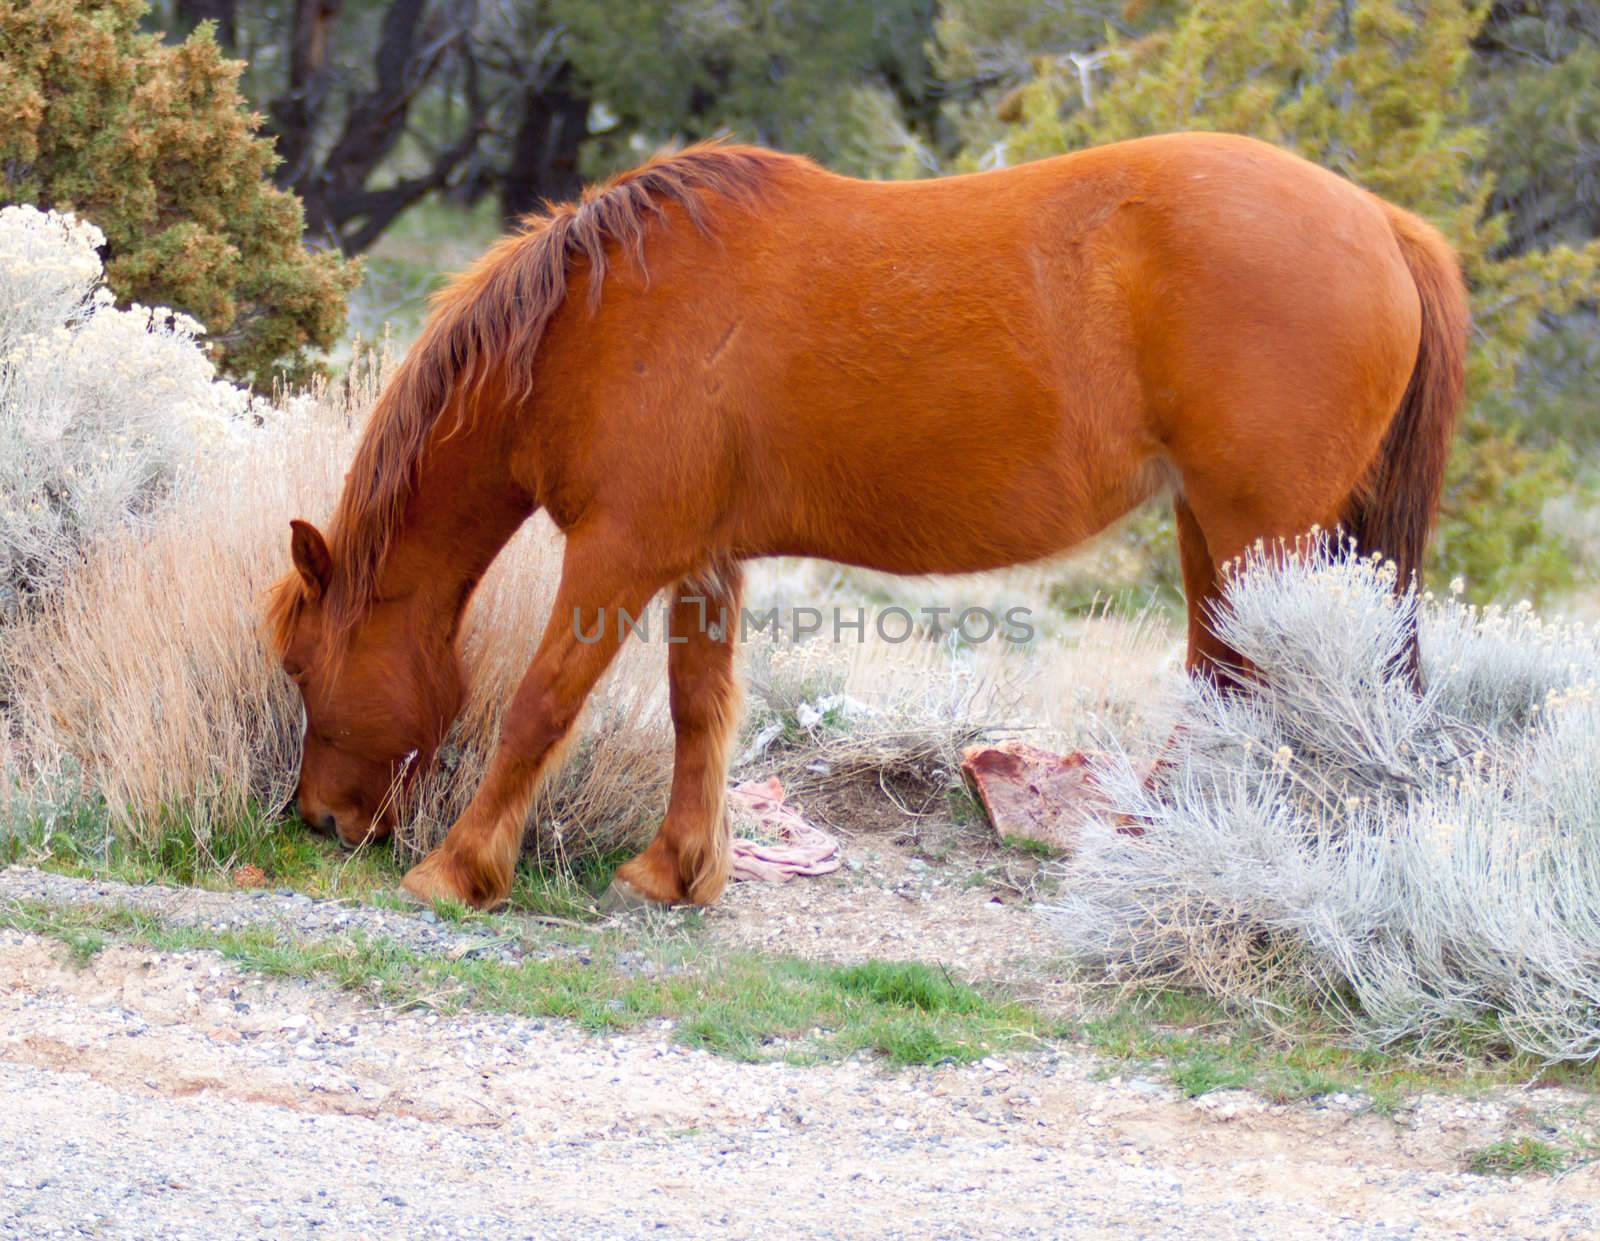 A wild horse is eating the sagebrush.